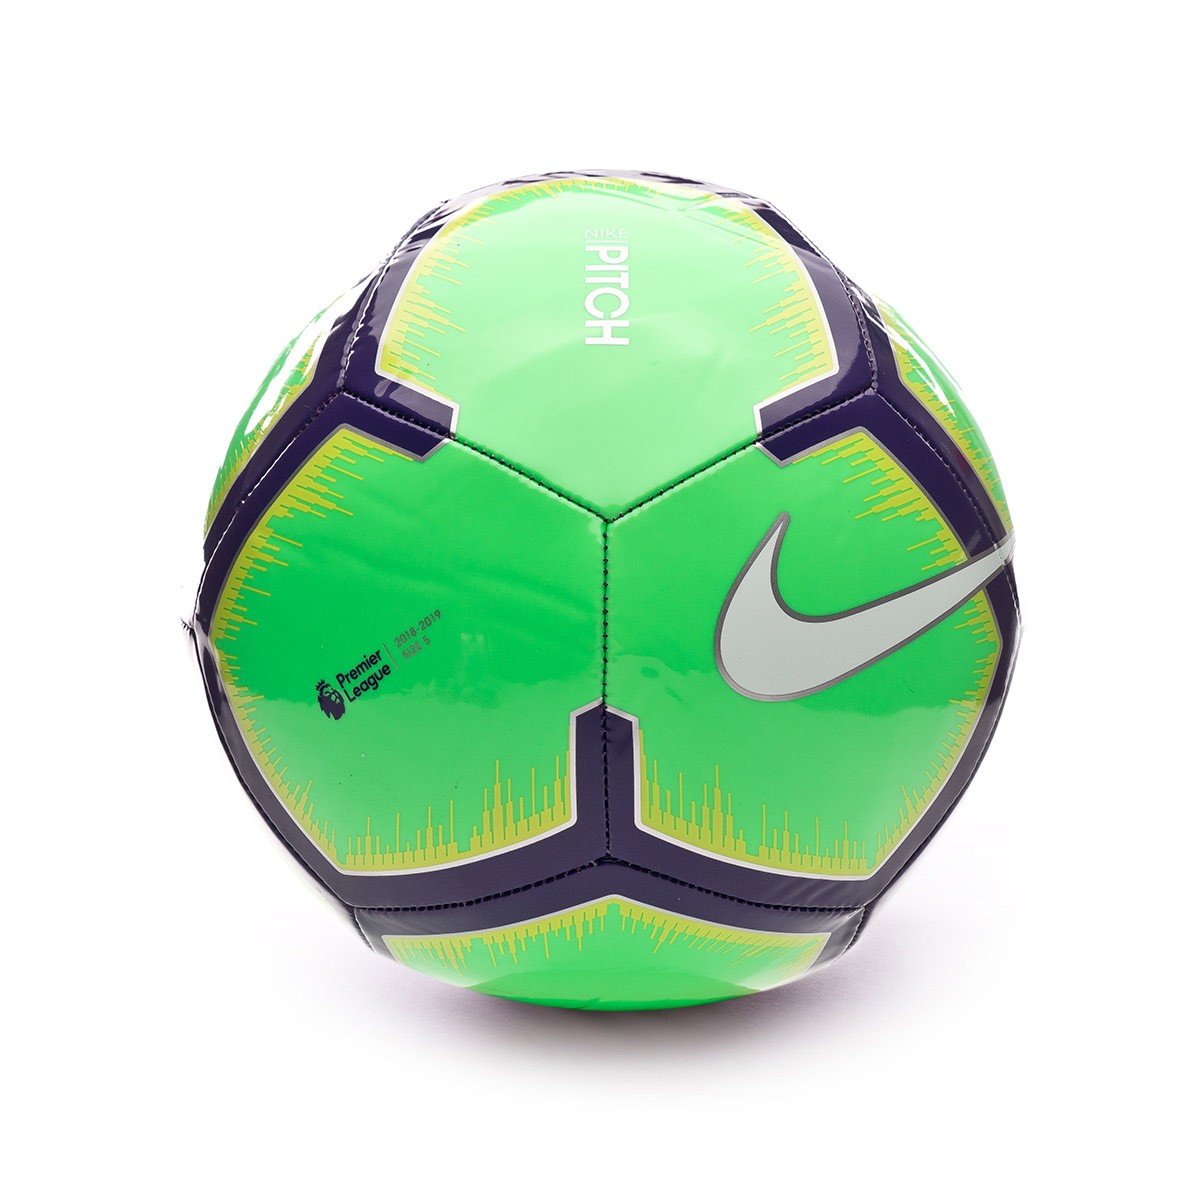 yellow and purple premier league ball